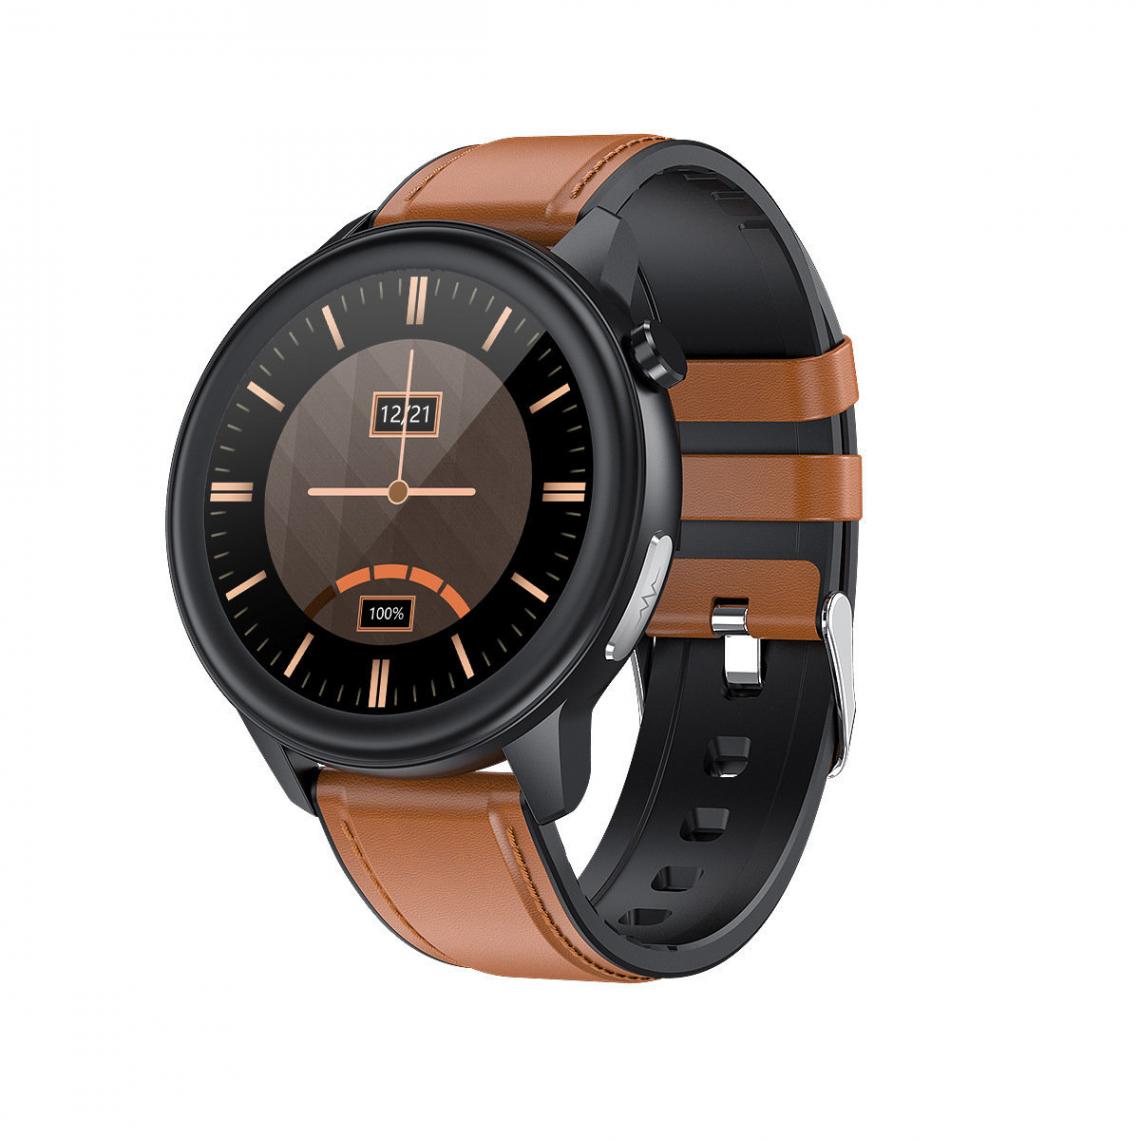 Chronotech Montres - Chronus Smart Watch, Fitness Tracker With Heart Rate Monitor Step Counter Sleep Monitor, 1.3 inch Touch Screen IP68 Waterproof Sport Watch For Women Men Compatible With Android IOS Phones(Brown) - Montre connectée